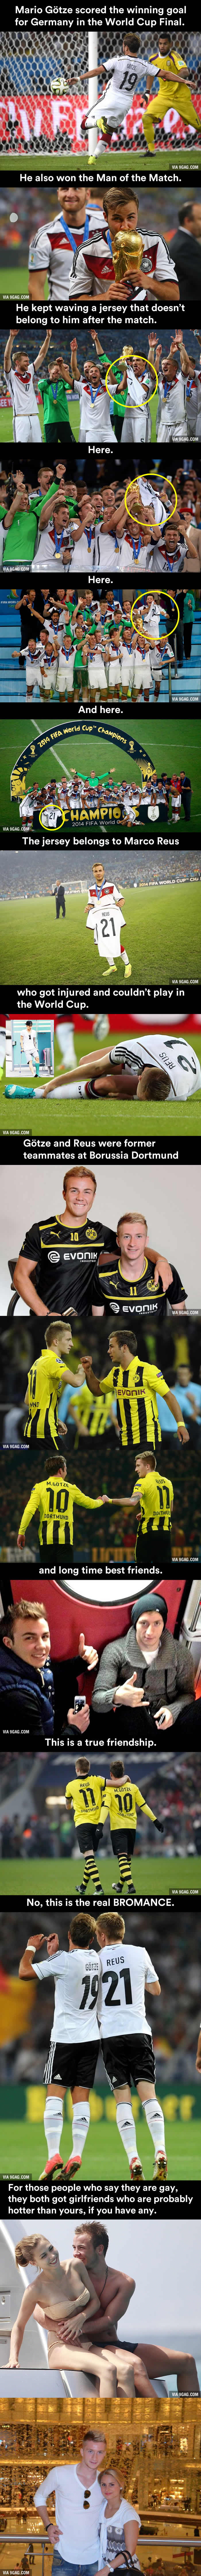 Mystery solved: Why did Mario Götze keep waving a jersey that doesn't belong to him?